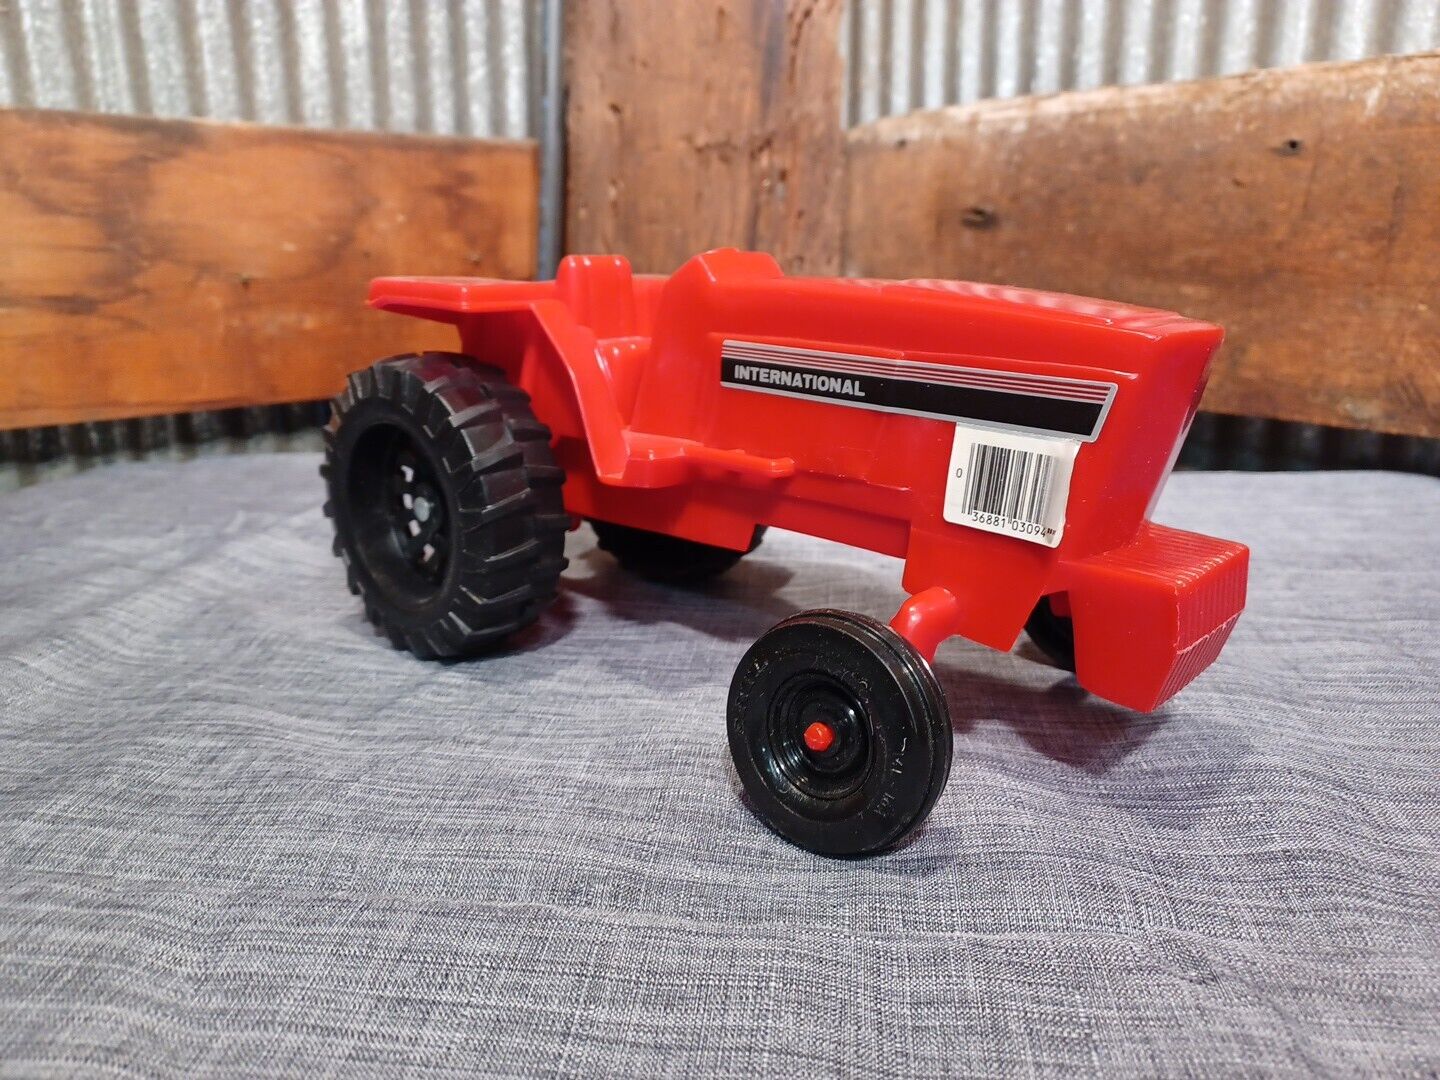 ERTL International Tractor Red Tractor Toy Plastic 14A-16L Vintage Antique Kids